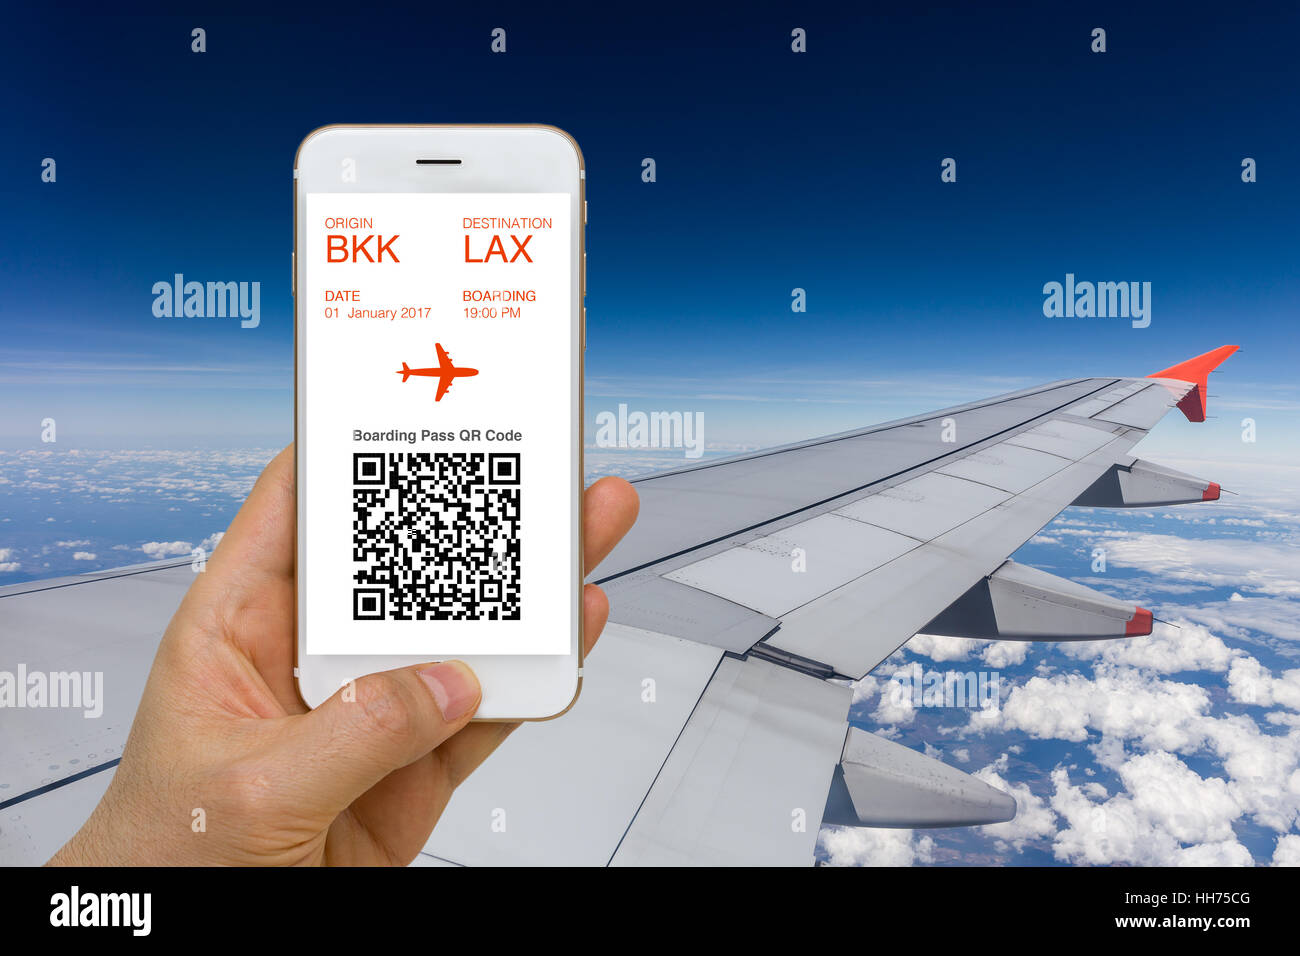 Concept of e-ticket or boarding pass application for traveling by plane on smartphone screen. Stock Photo